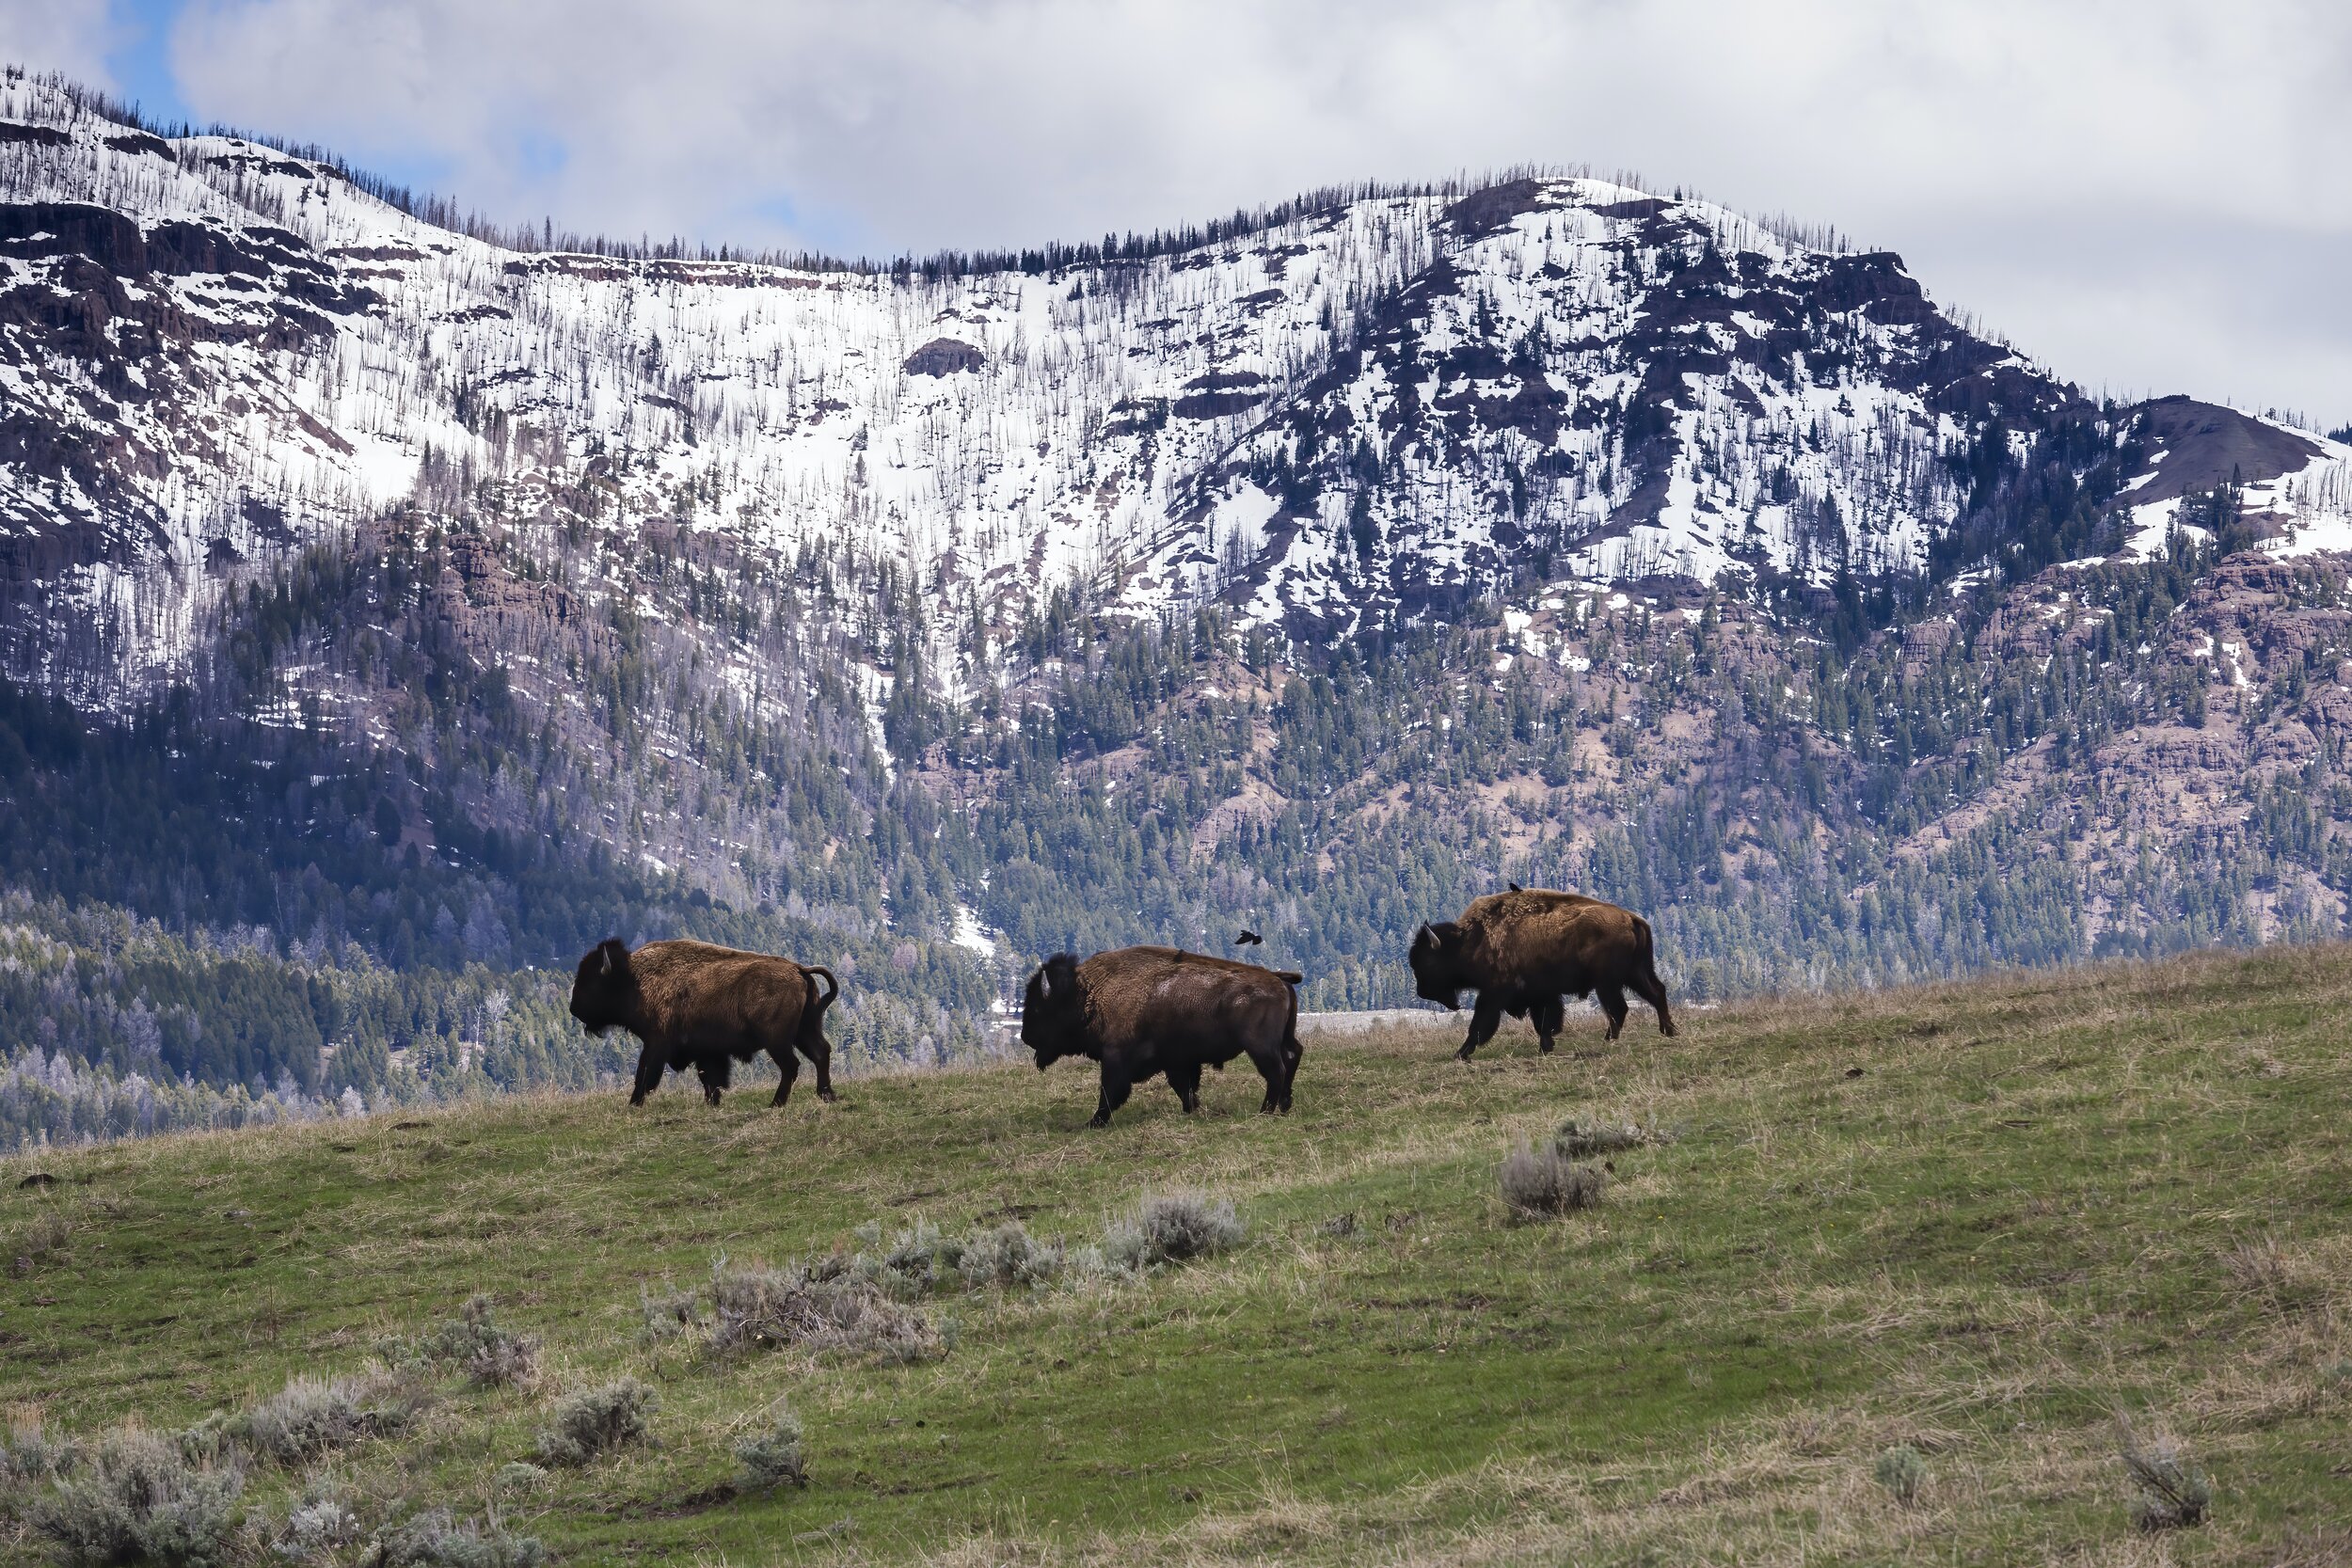 Bison In Motion. Yellowstone N.P. (May 2018)